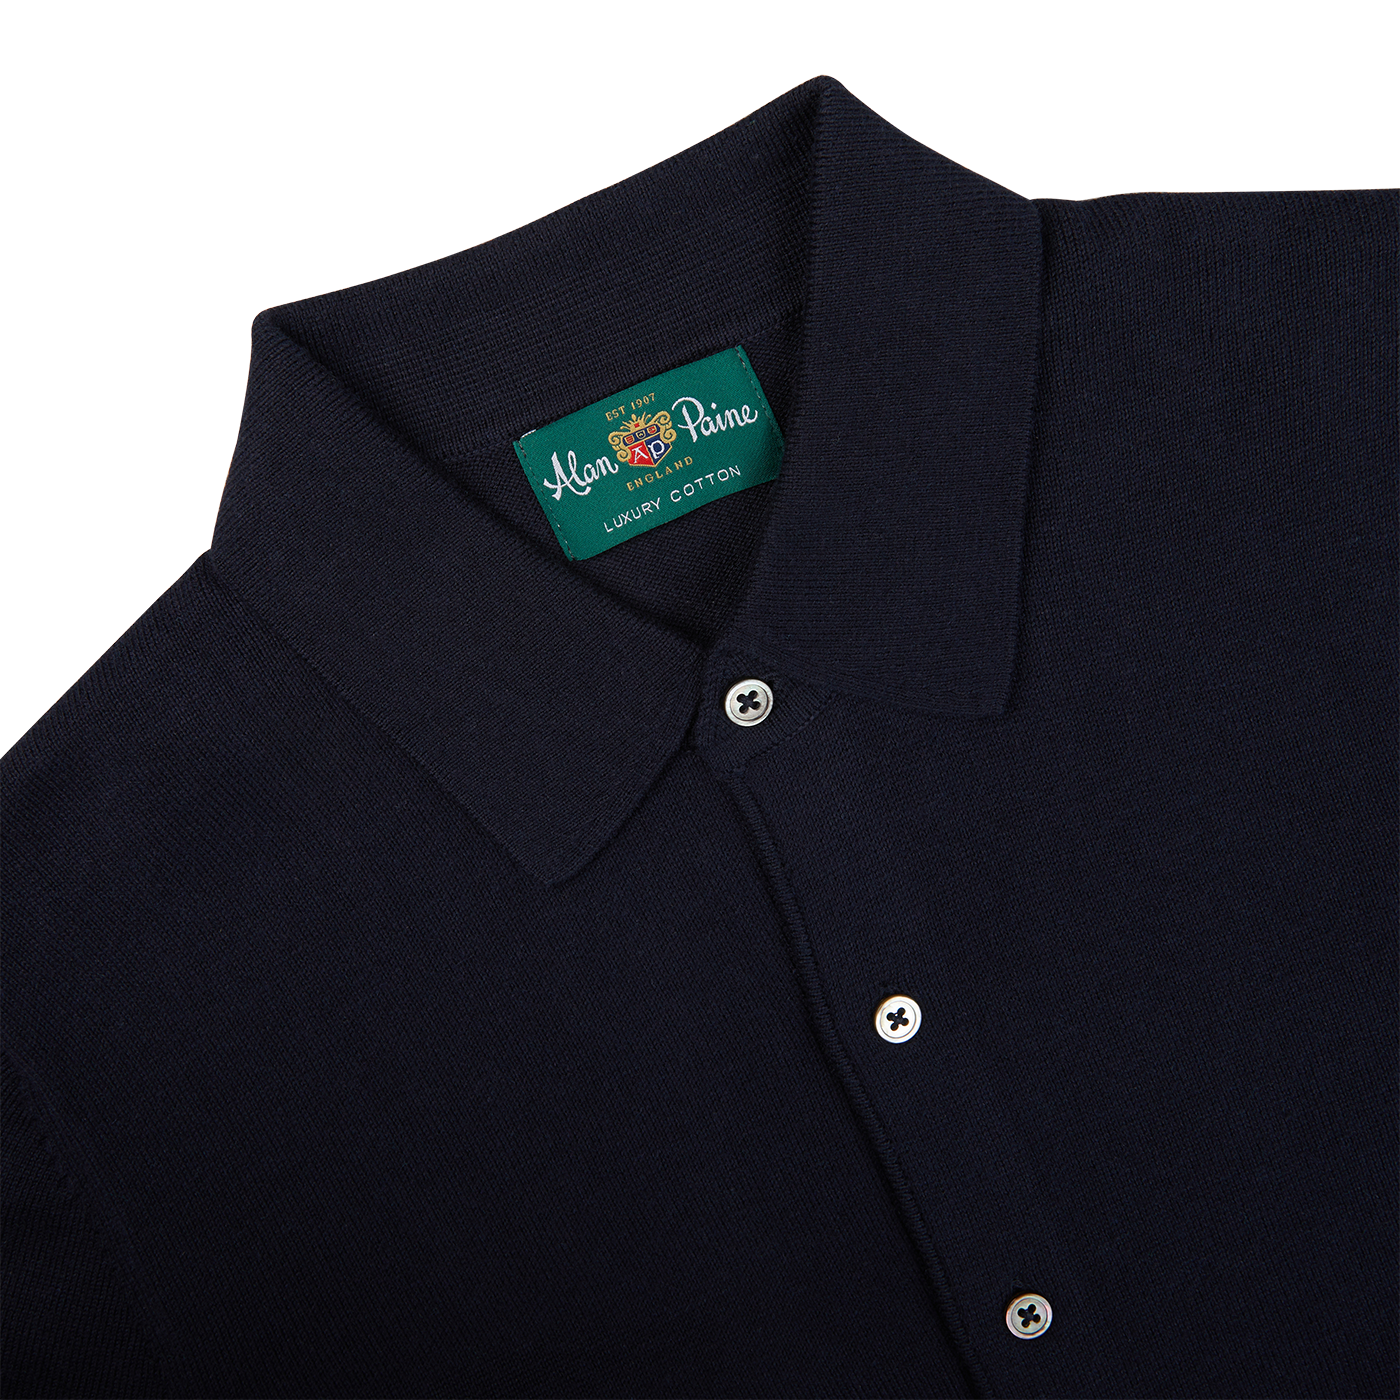 The men's navy blue luxury cotton knitted overskirt from Alan Paine.